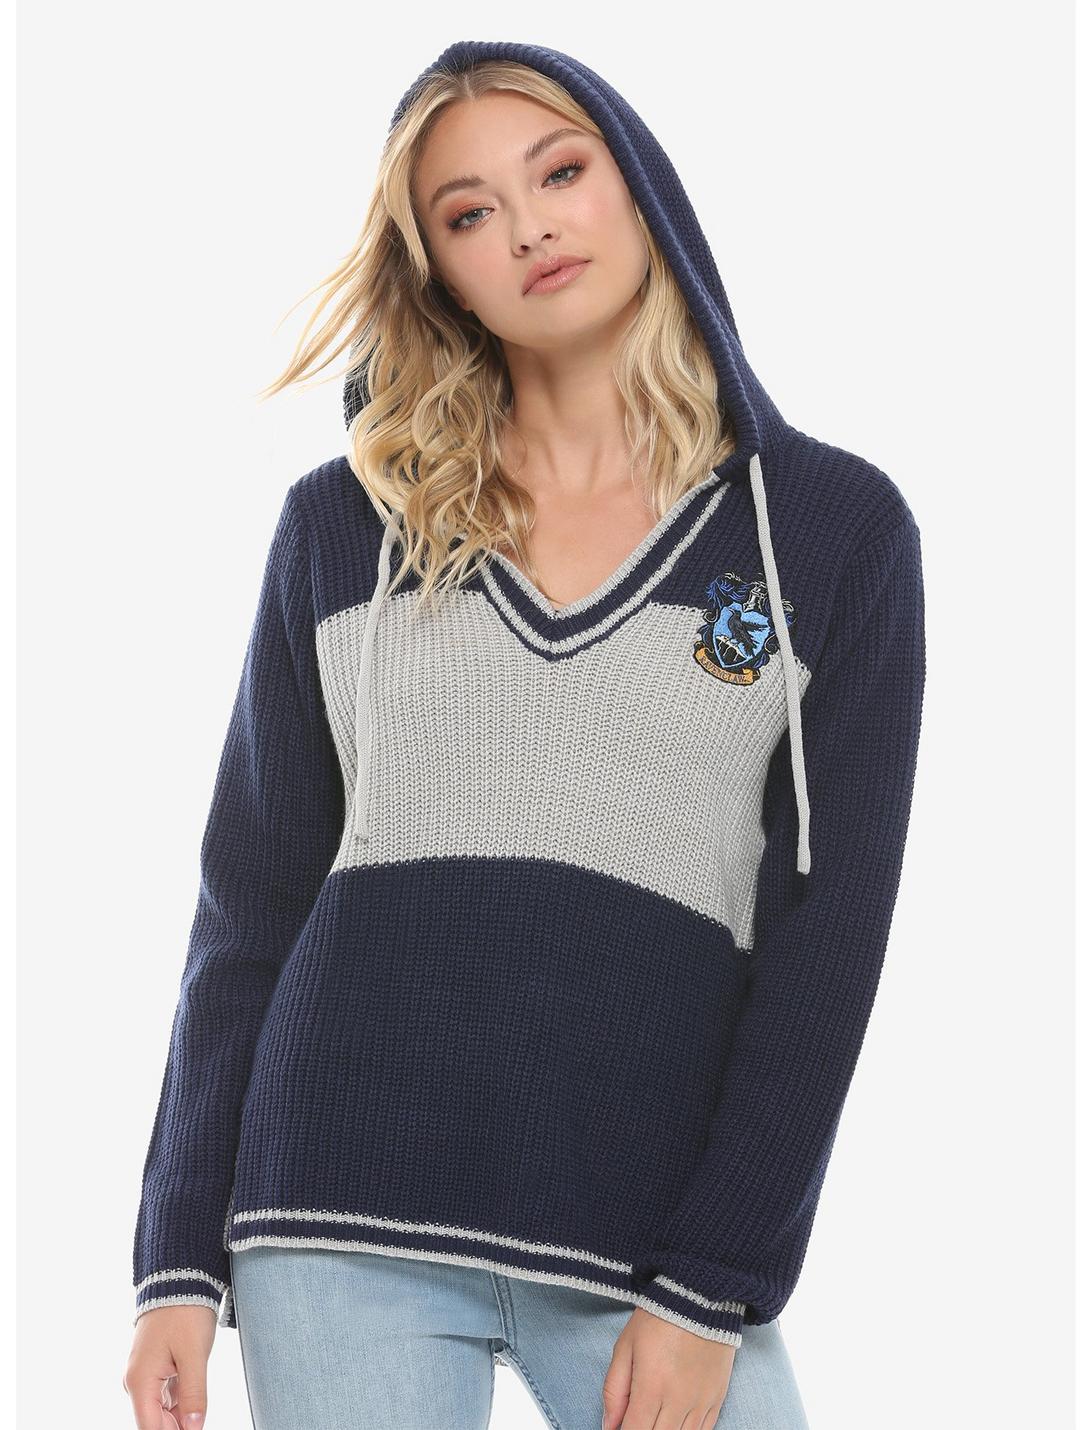 Plus Size Harry Potter Ravenclaw Girls Hooded Sweater, GREY, hi-res